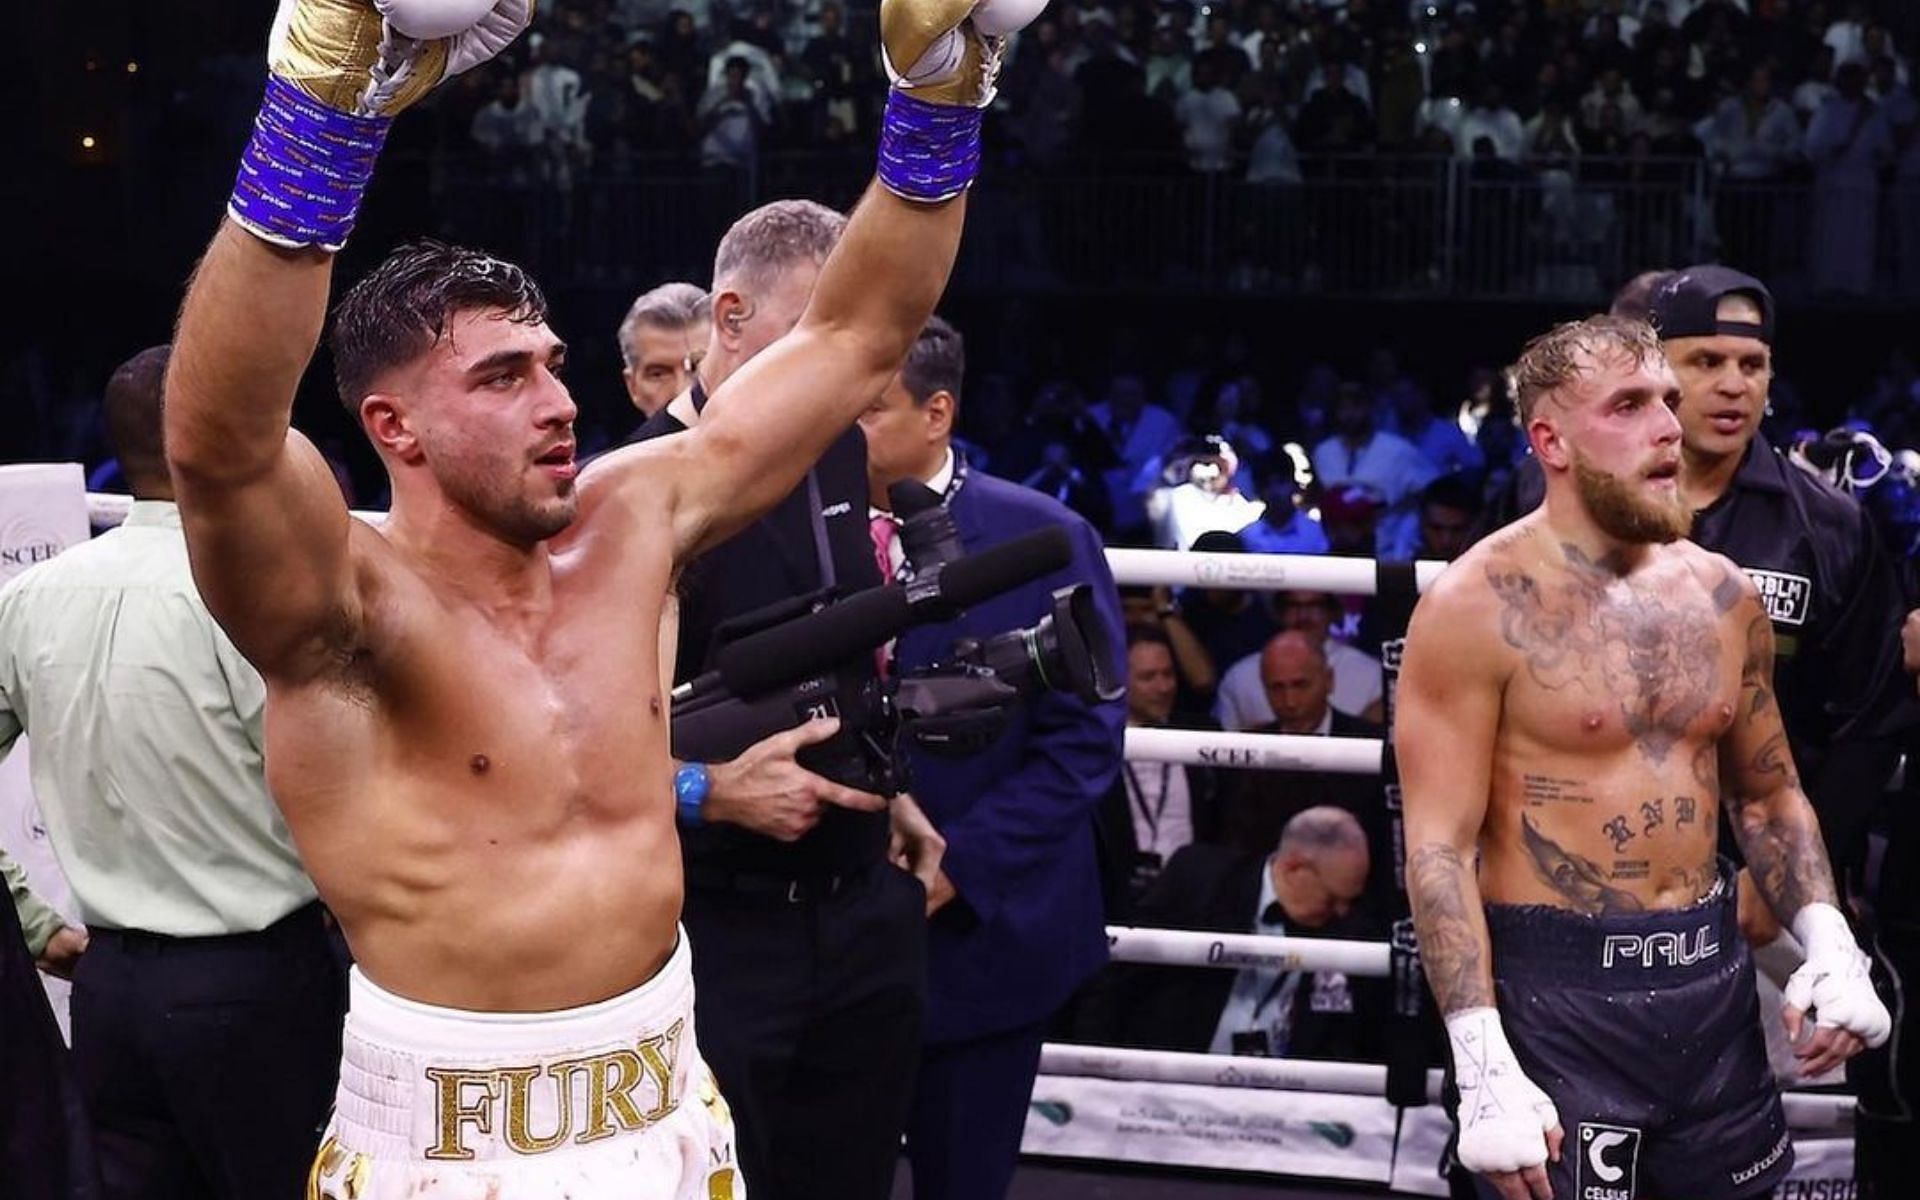 Tommy Fury (left) getting his hand raised after beating Jake Paul (right) (Images courtesy @tommyfury on Instagram)